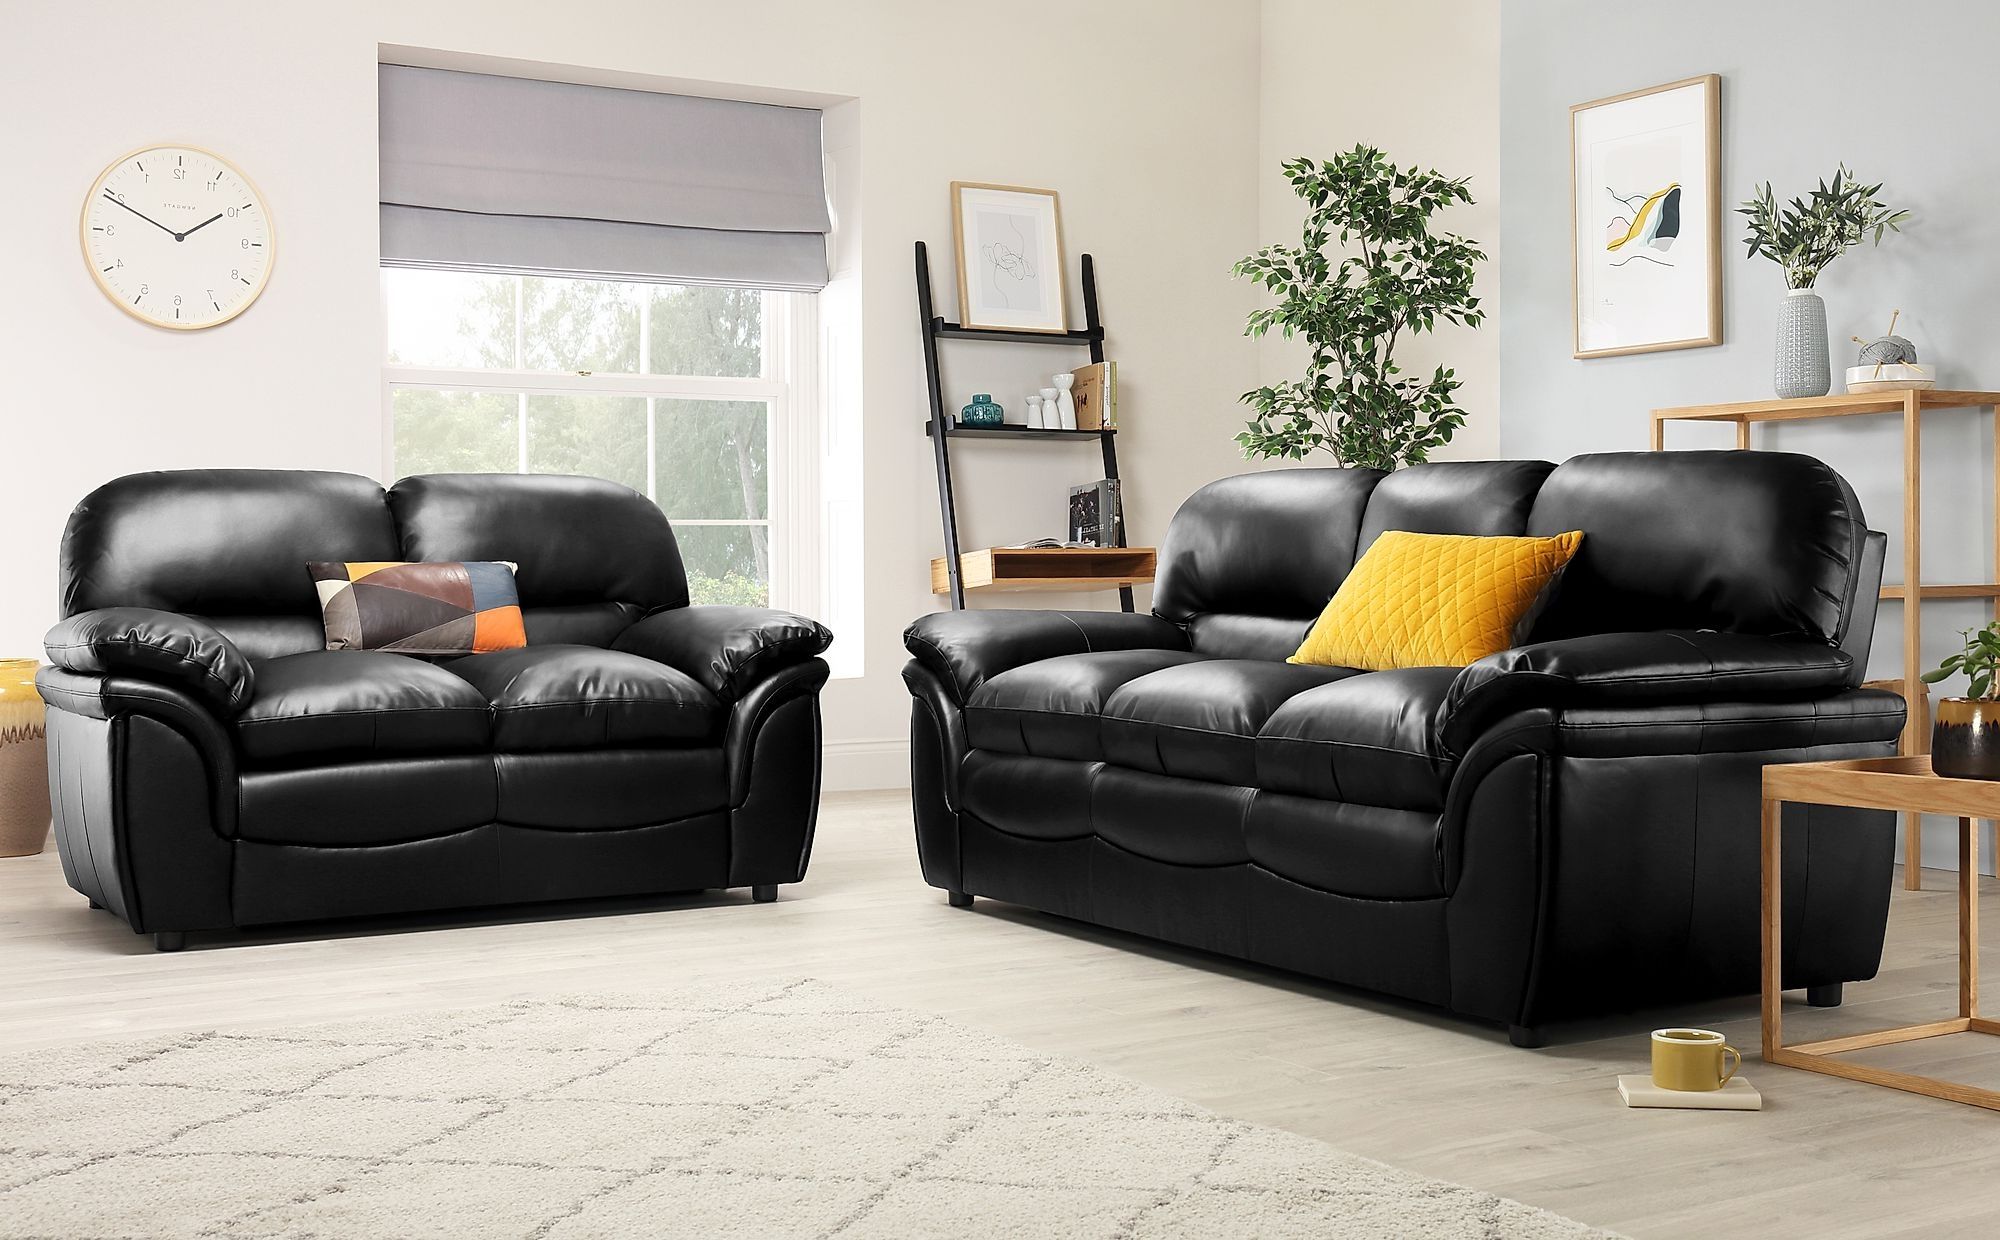 3 Seat L Shaped Sofas In Black For Favorite 8 Photos Rochester Black Leather 3 Seater Sofa And Description – Alqu Blog (View 9 of 15)